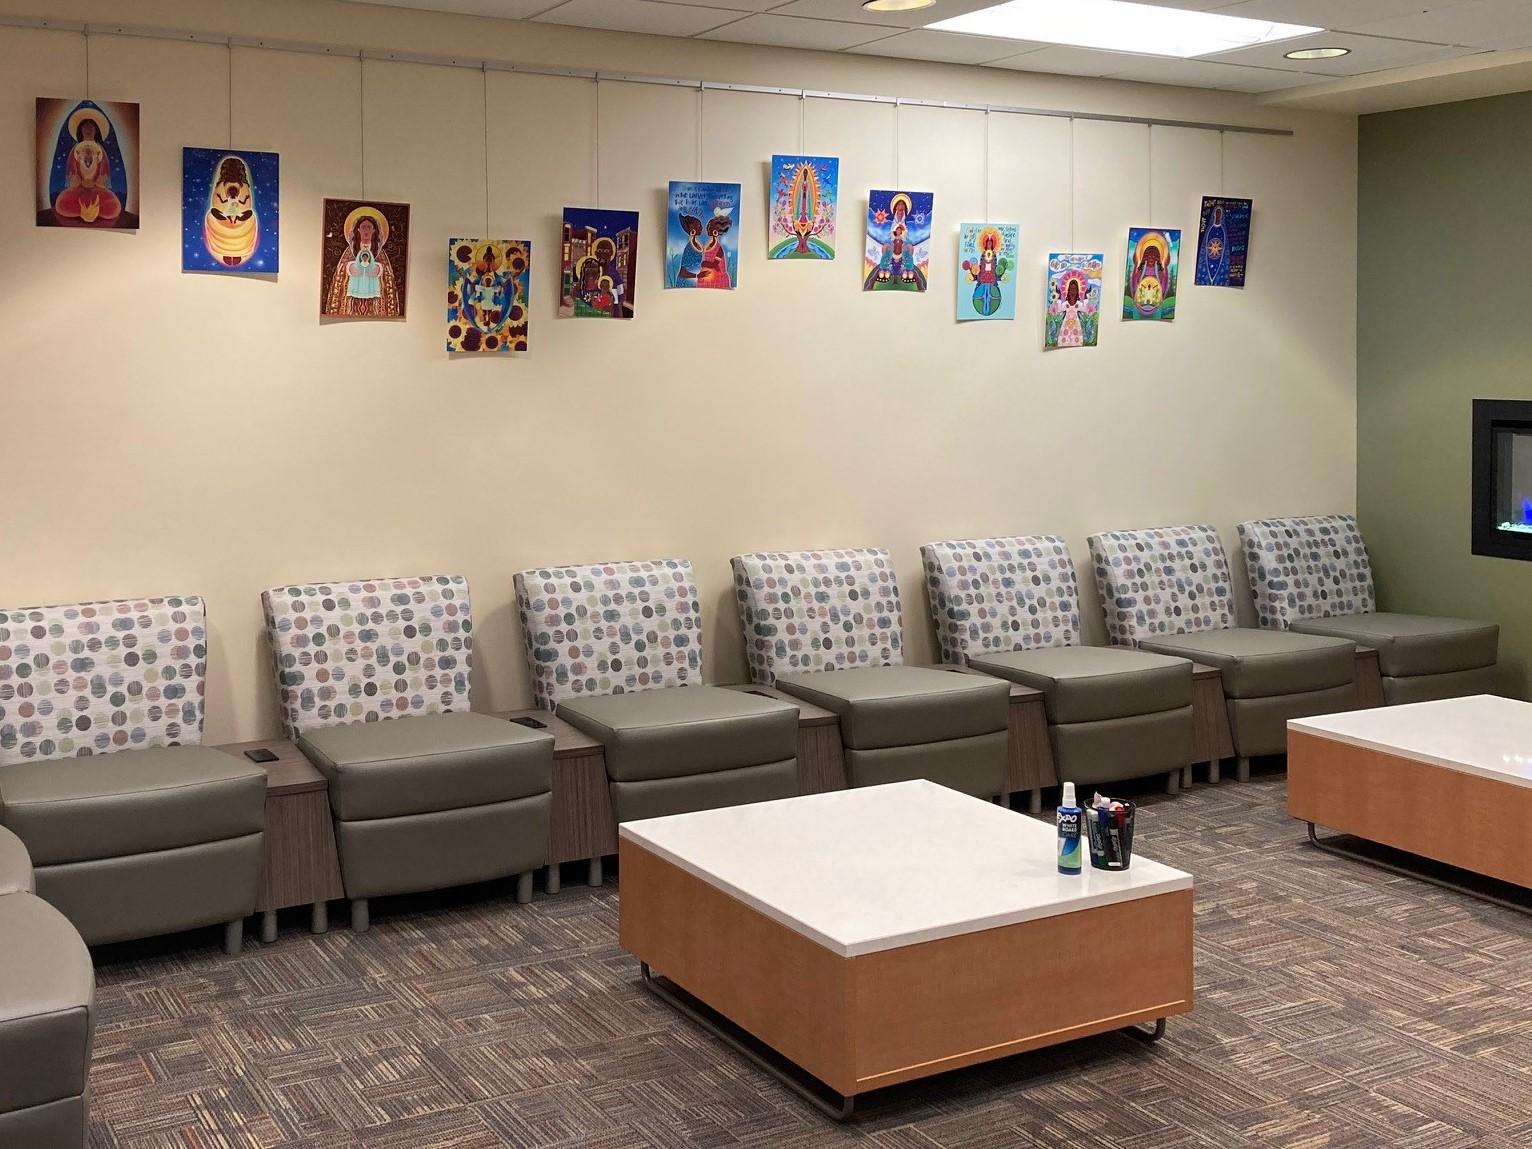 Picture of Madonnas of Color paintings displayed in the library entrance area